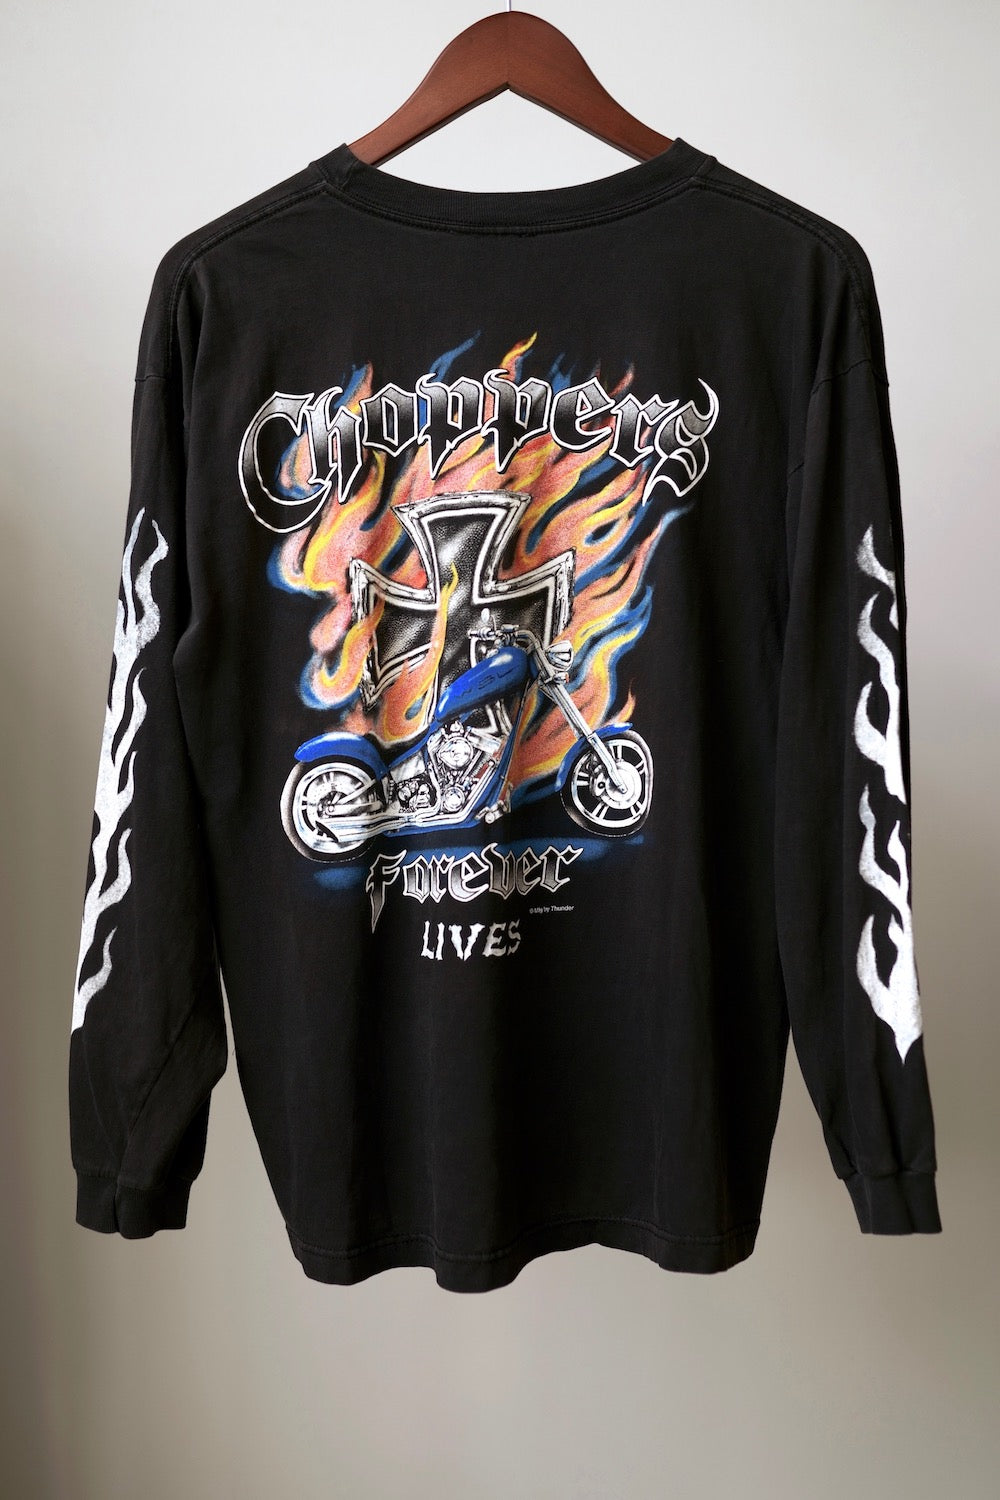 WSL Customized Vintage Reversible L/S "Choppers Forever Time" T-Shirt